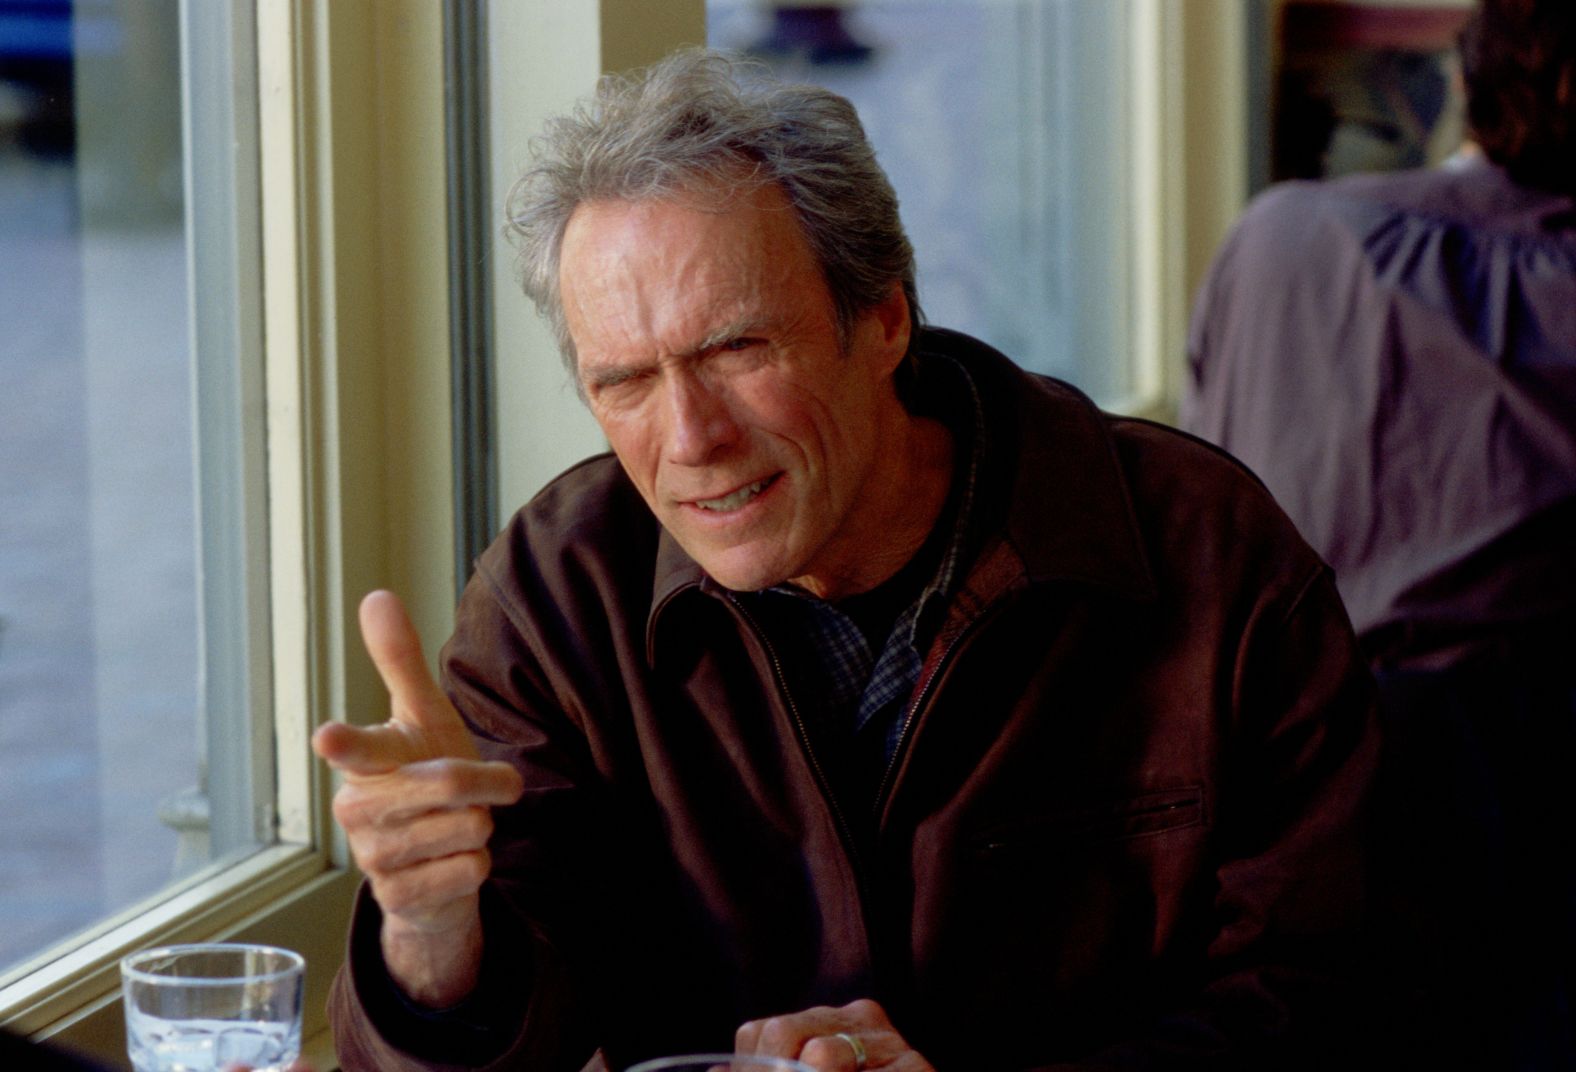 Eastwood balanced his screen contributions between acting, directing, composing and producing. Here he's working on "True Crime" (1999).